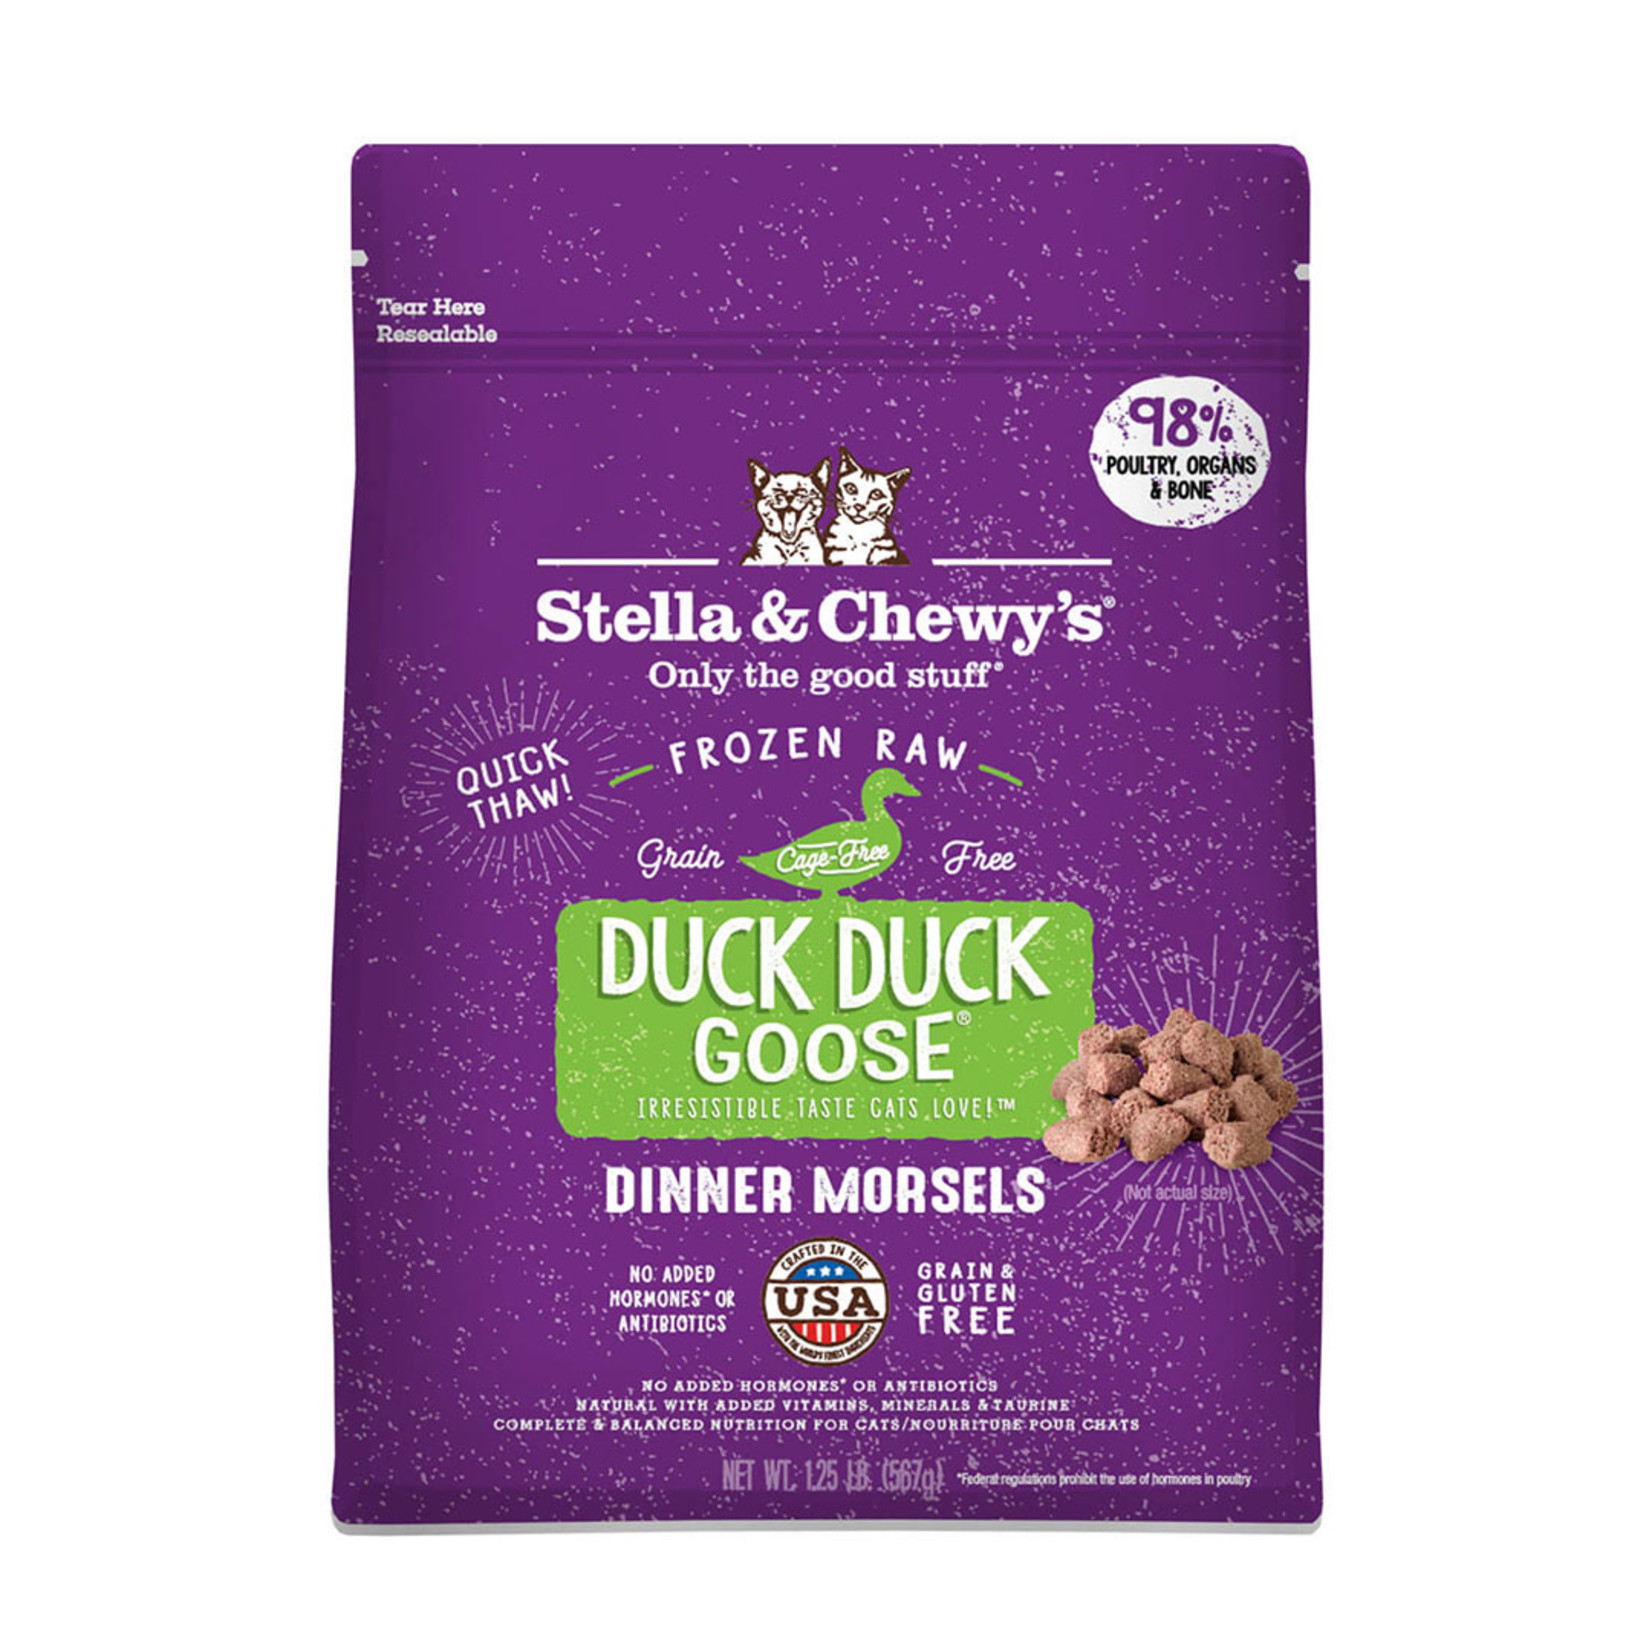 Stella and Chewys Stella & Chewy's Frozen Raw Cat Food Duck Duck Goose Dinner Morsels 1.25lb Grain Free